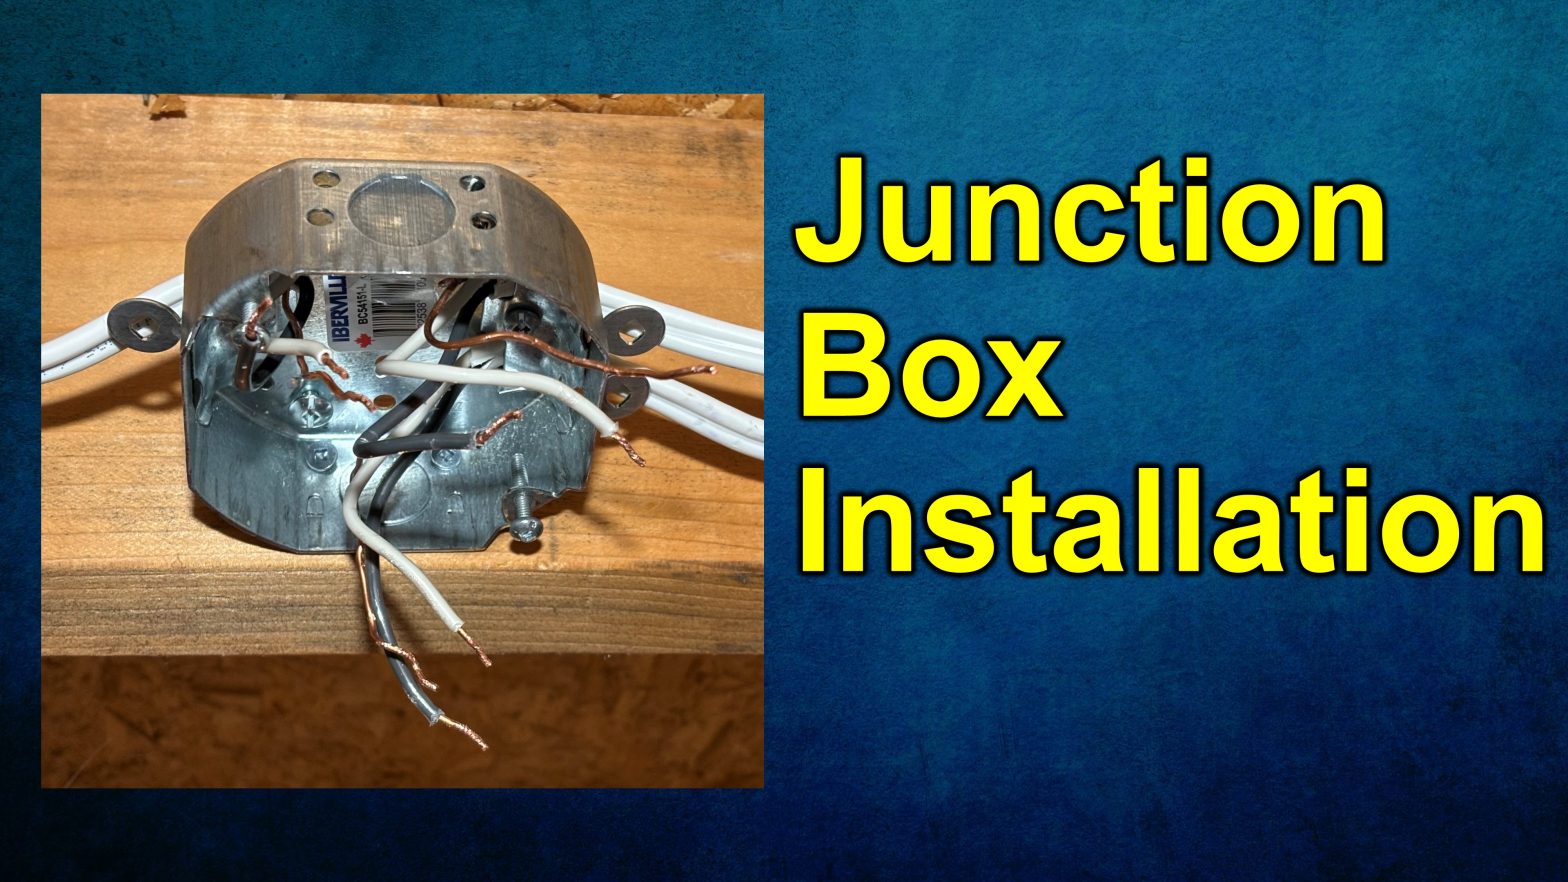 5 Mistakes DIYers Make Installing Junction Boxes for Electrical Wiring in Their House